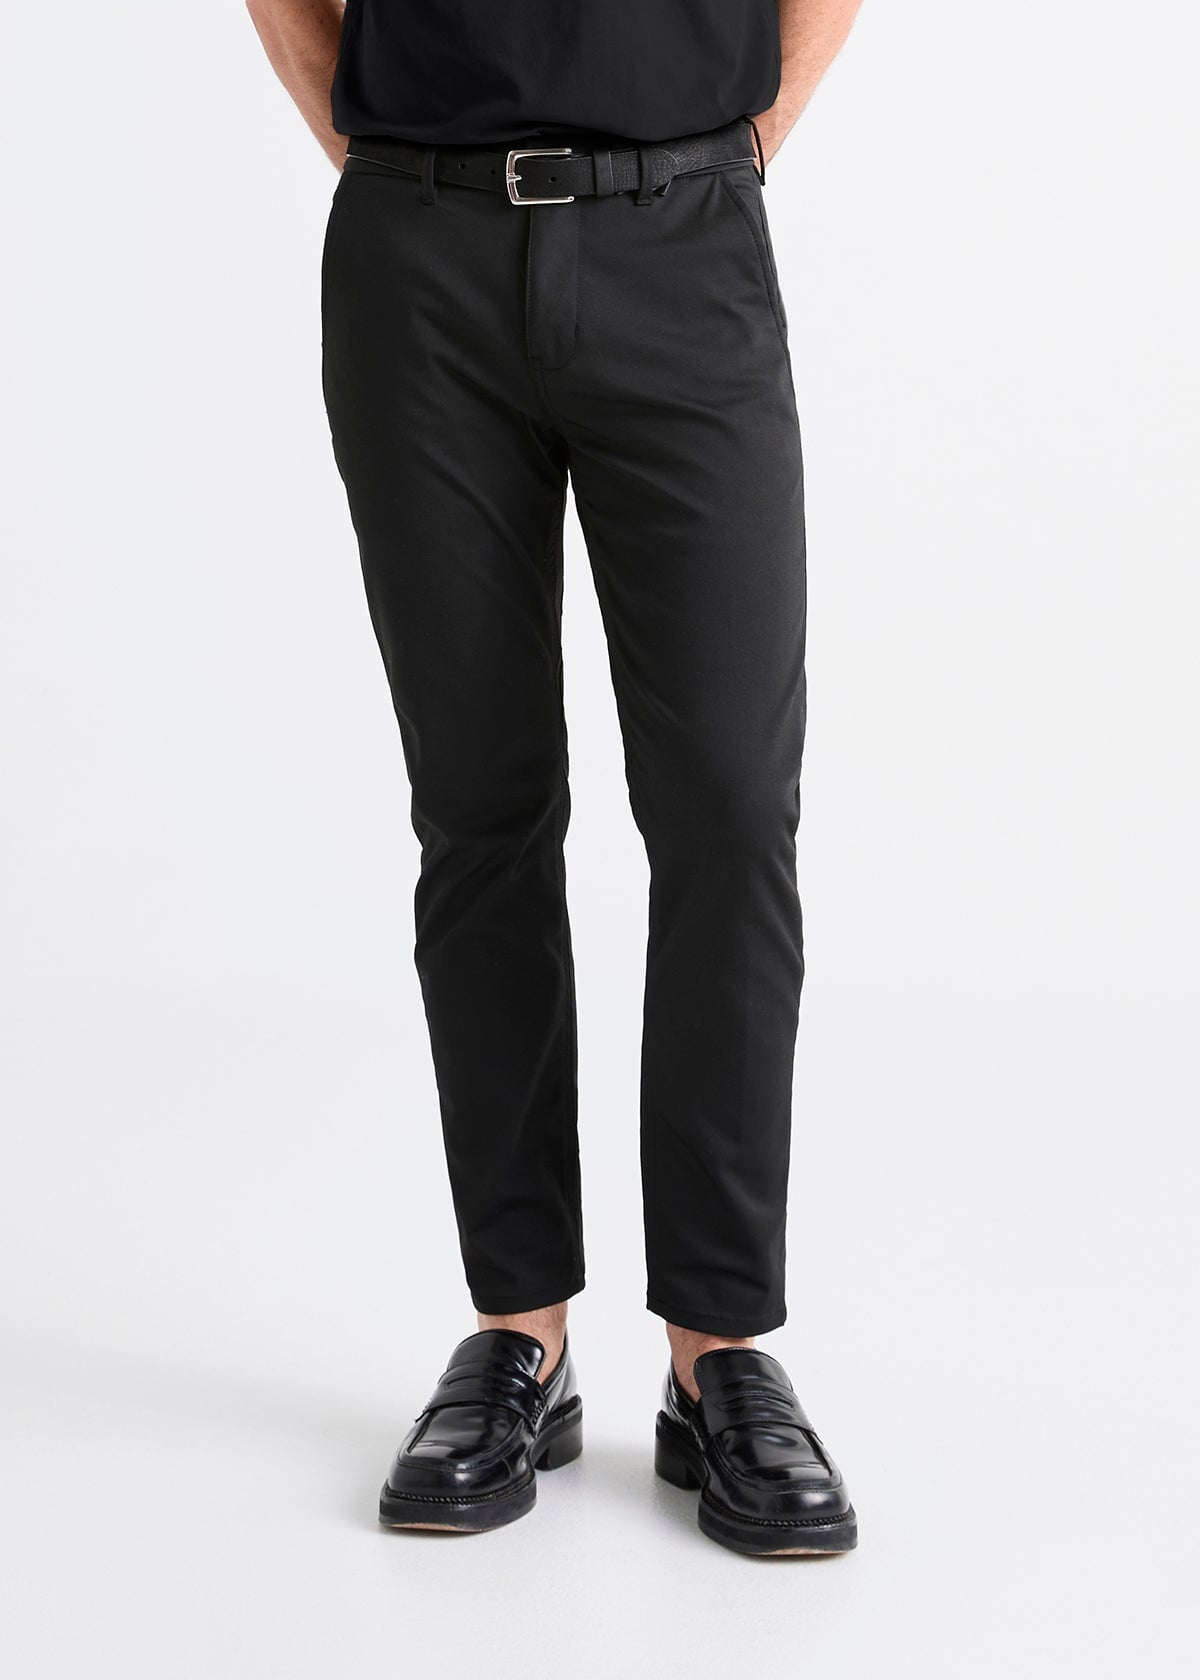 Buy Black Slim Fit Pants by  with Free Shipping